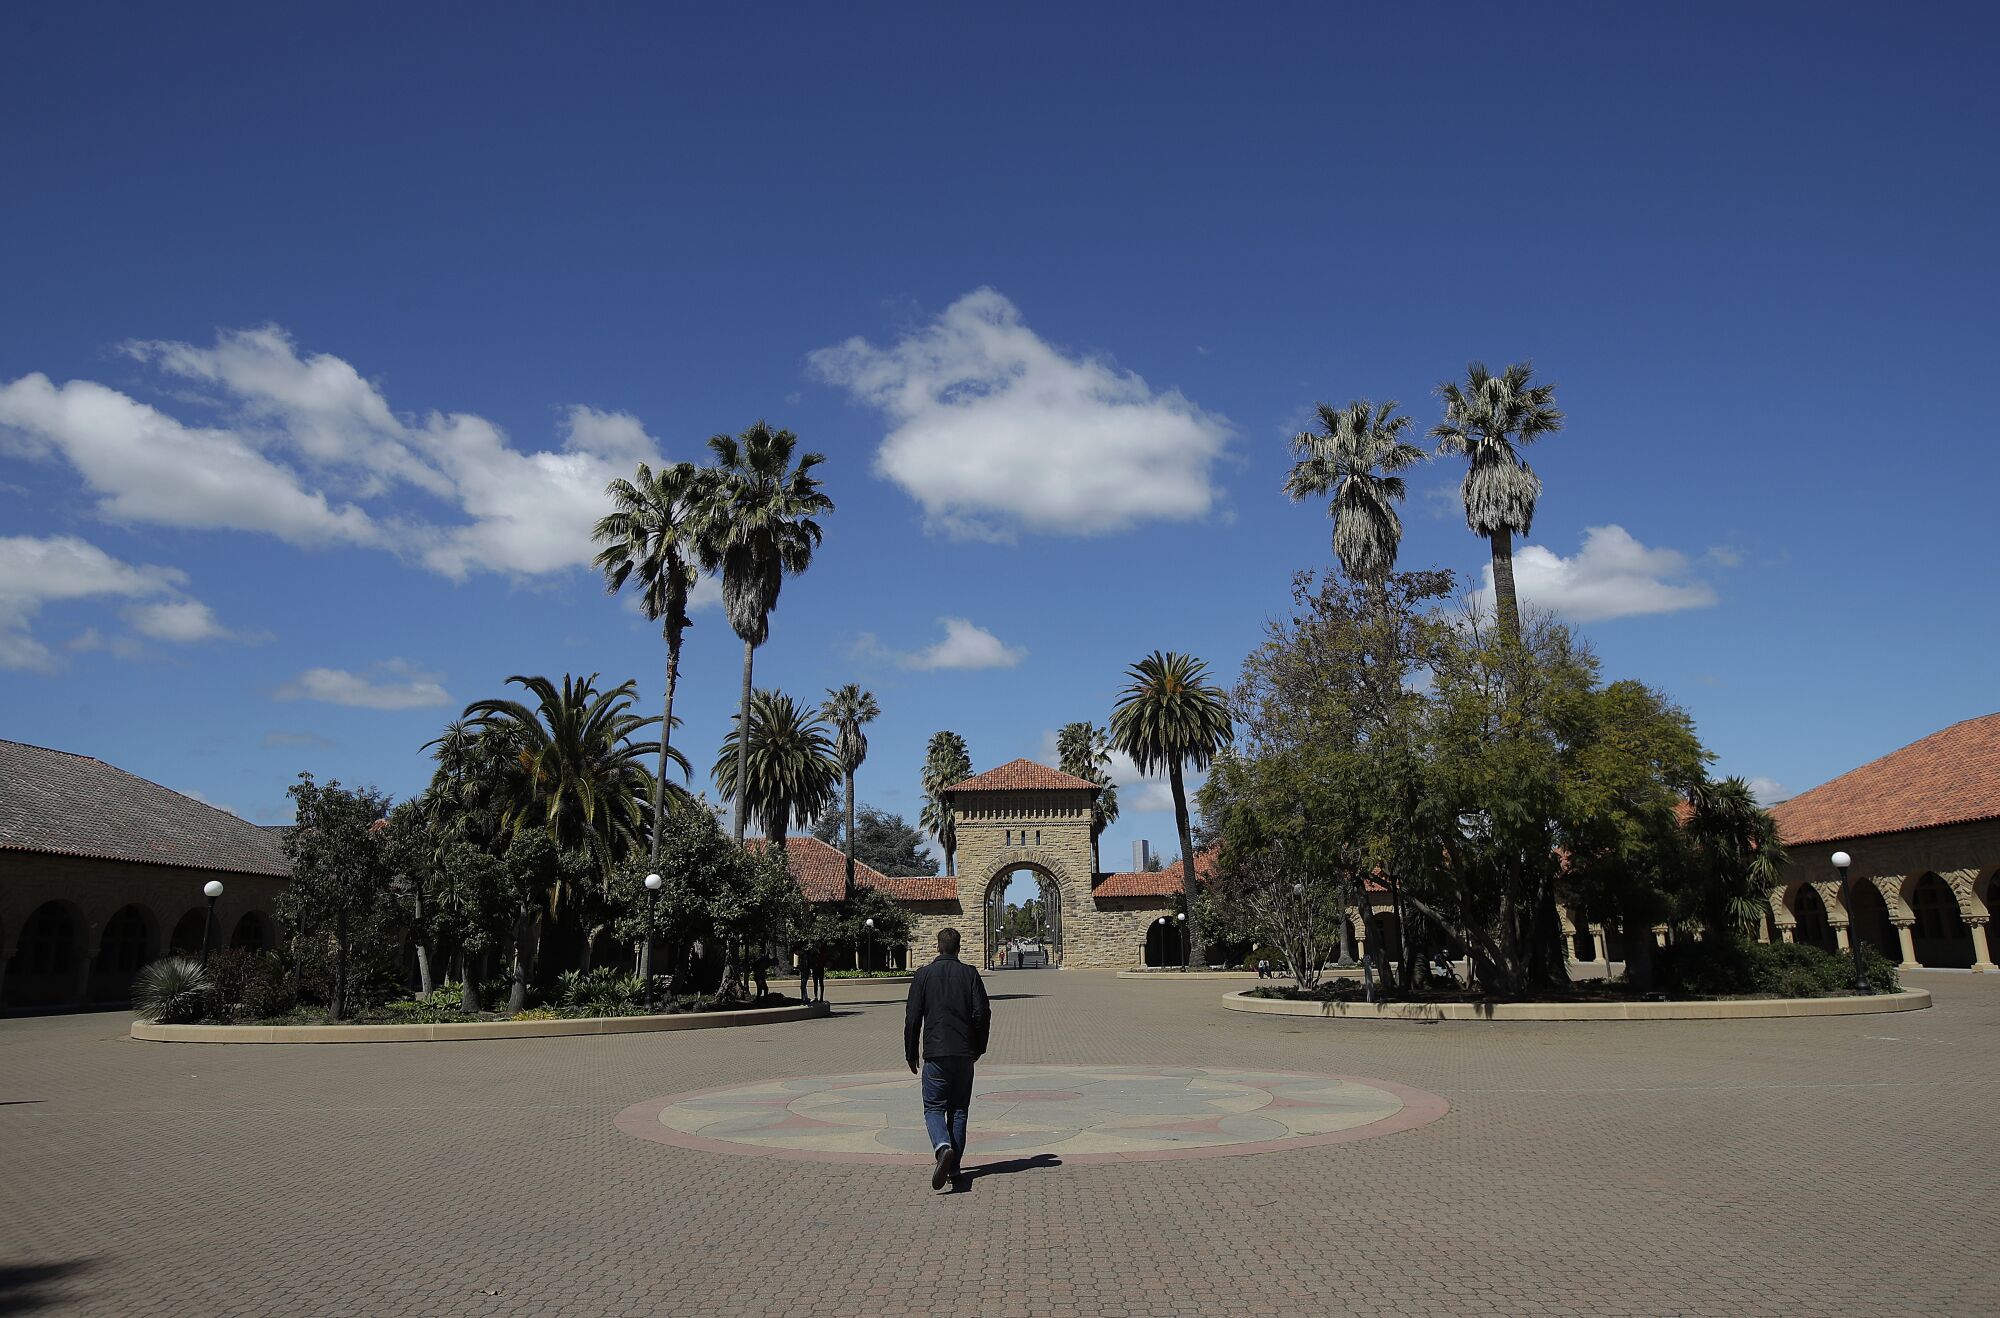 A pedestrian walks on the campus at Stanford University.